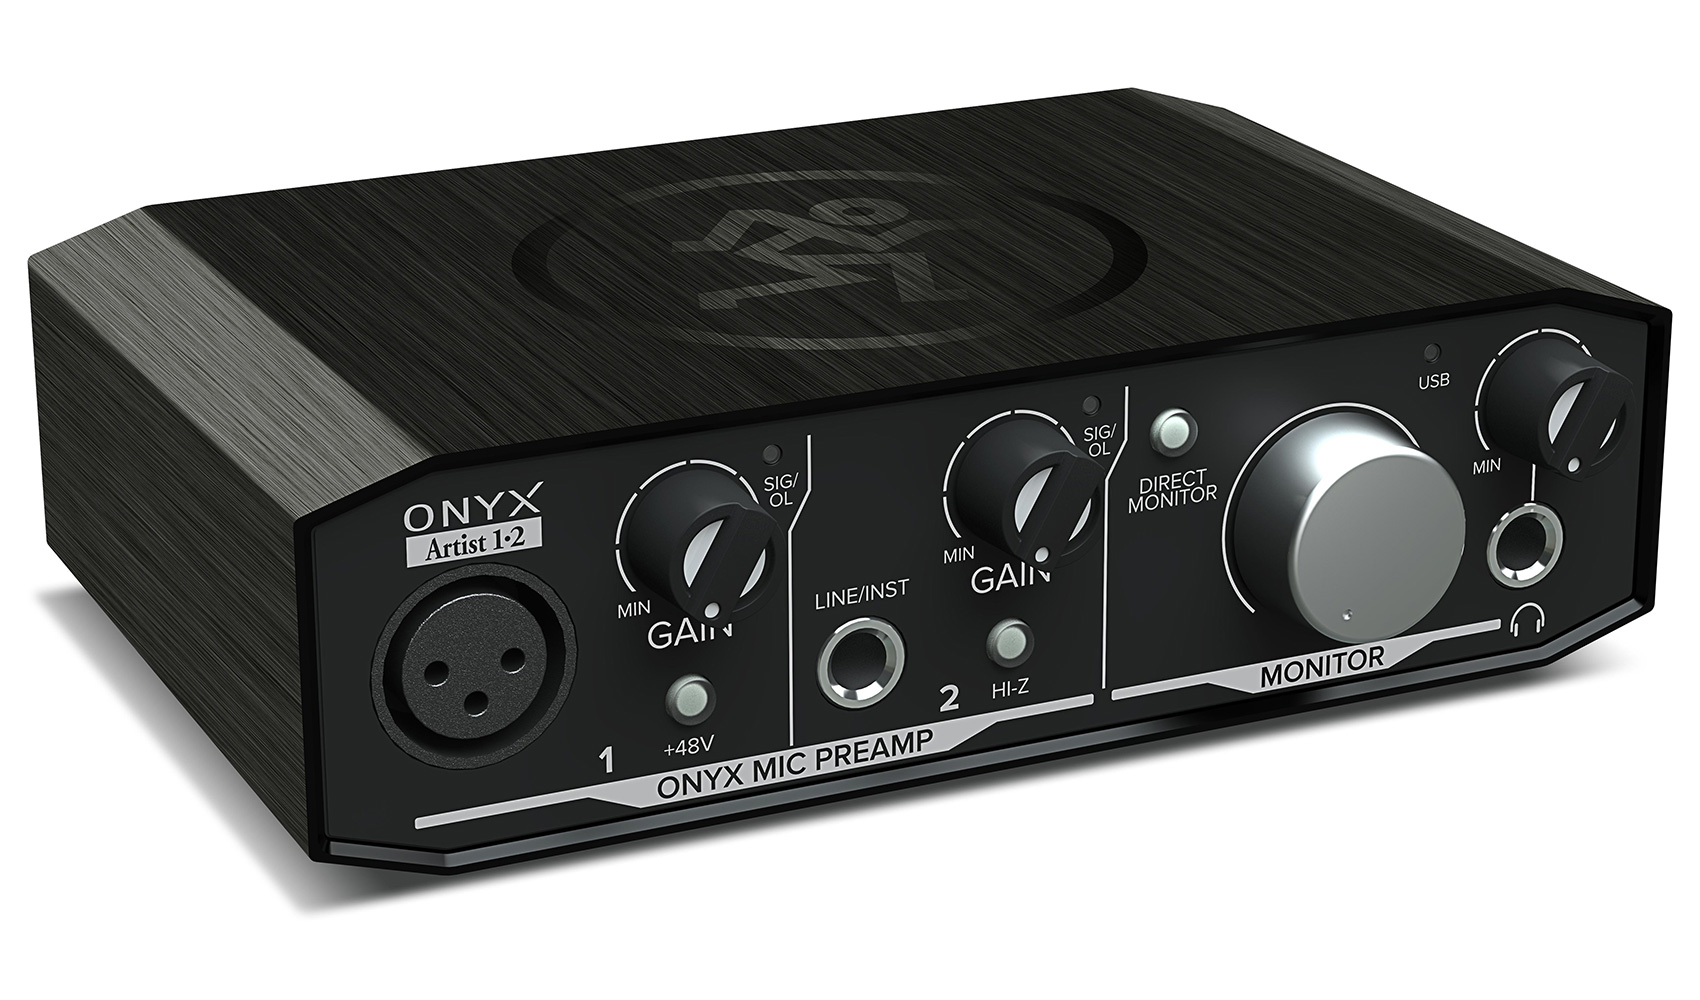 Mackie Onyx Artist 1.2 2x2 USB Audio Recording Studio Interface and Stand - image 5 of 11